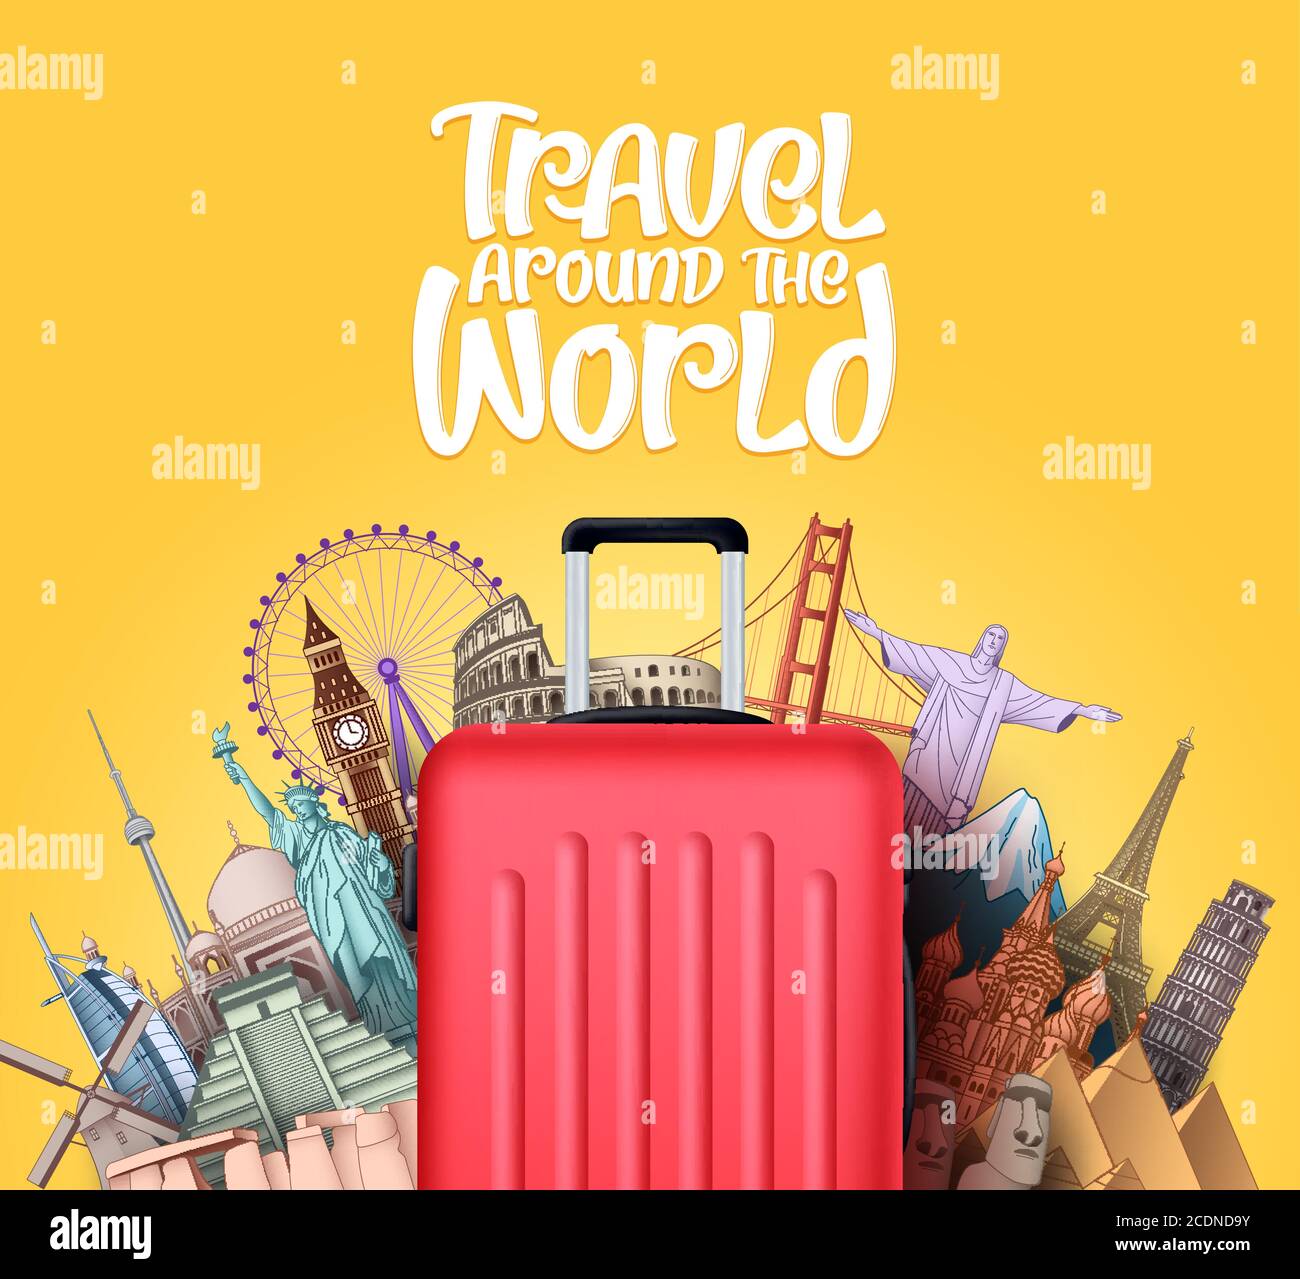 Travel around the world vector design. Travel in famous tourism landmarks and around the world attractions elements with luggage travelling bag Stock Vector